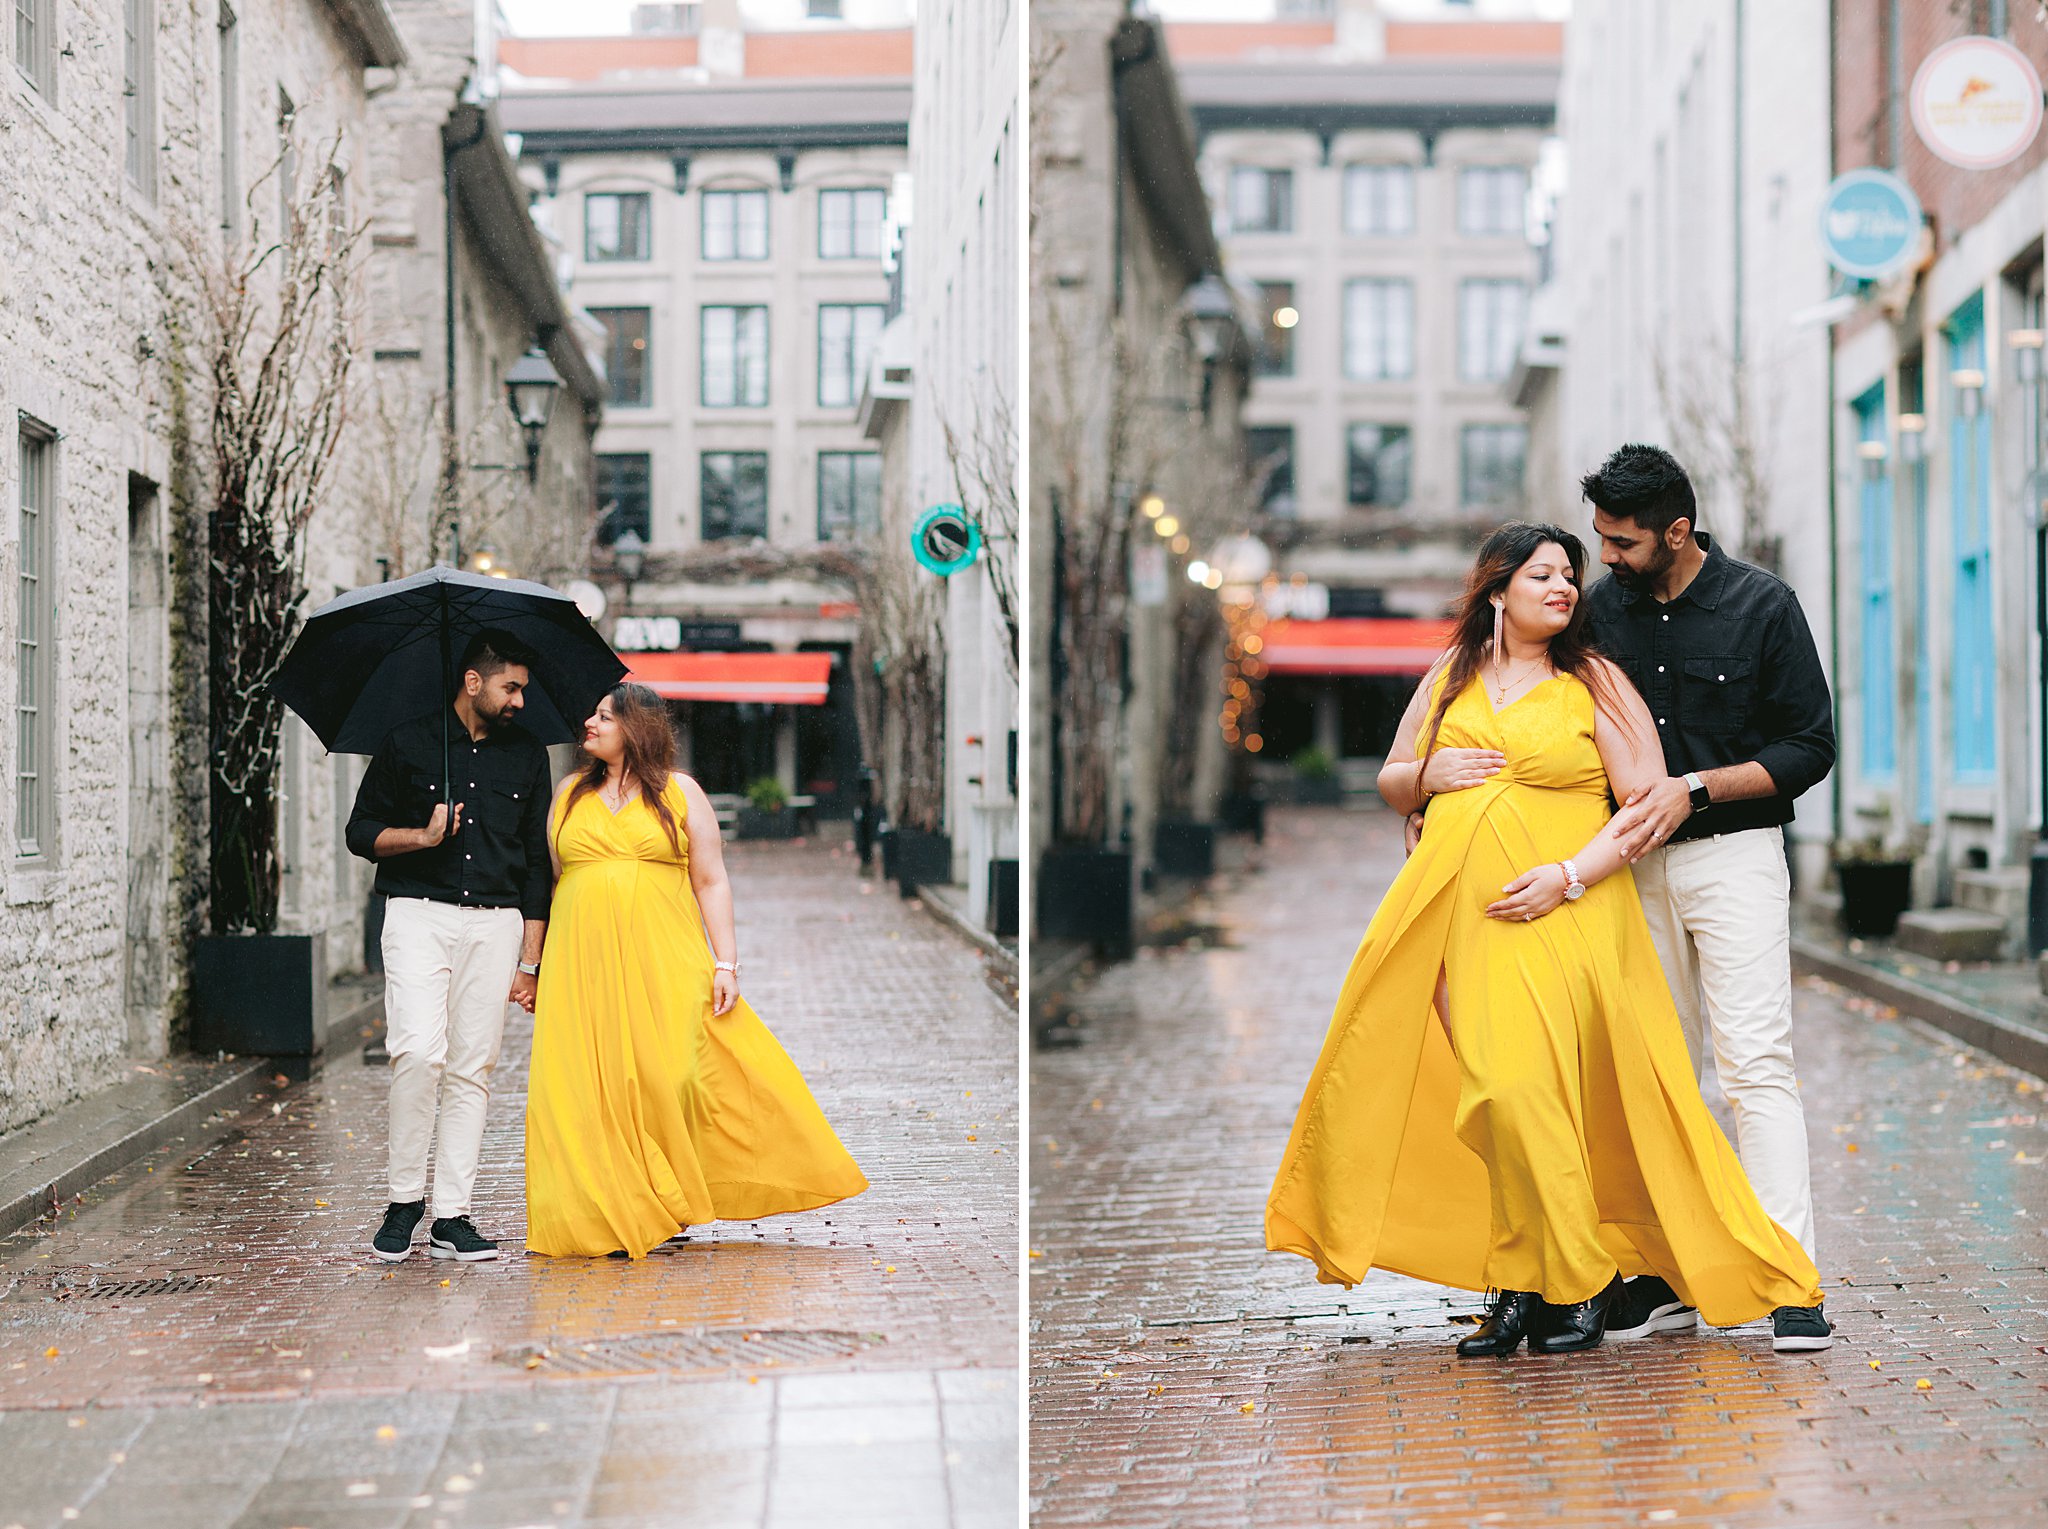 Maternity session capturing the love and anticipation of a couple against the scenic backdrop of Old Port, Montreal.